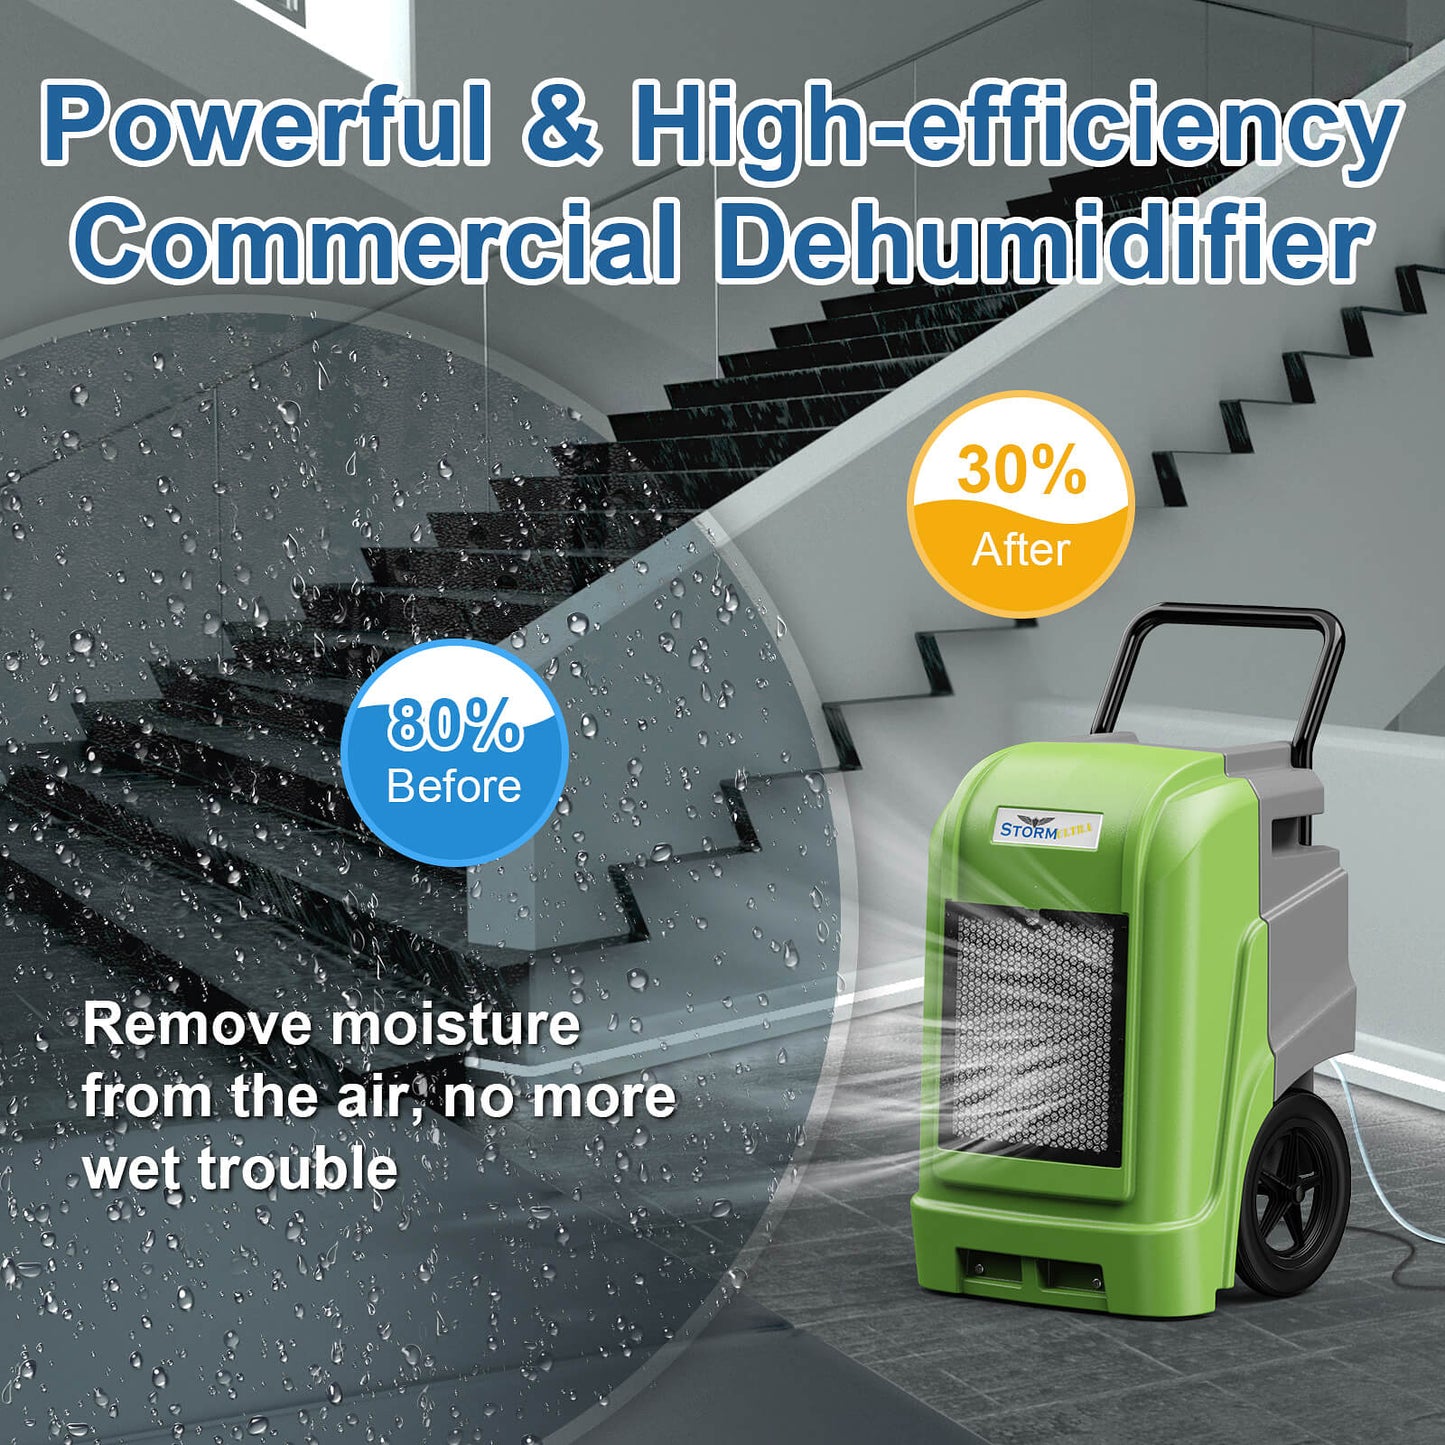 AlorAir Storm Ultra Commercial Dehumidifier with Pump Drain Hose, 190 Pints Smart Wi-Fi Large Capacity Industrial Dehumidifier for Basements, Garages & Job Sites, 5 Years Warranty AlorAir